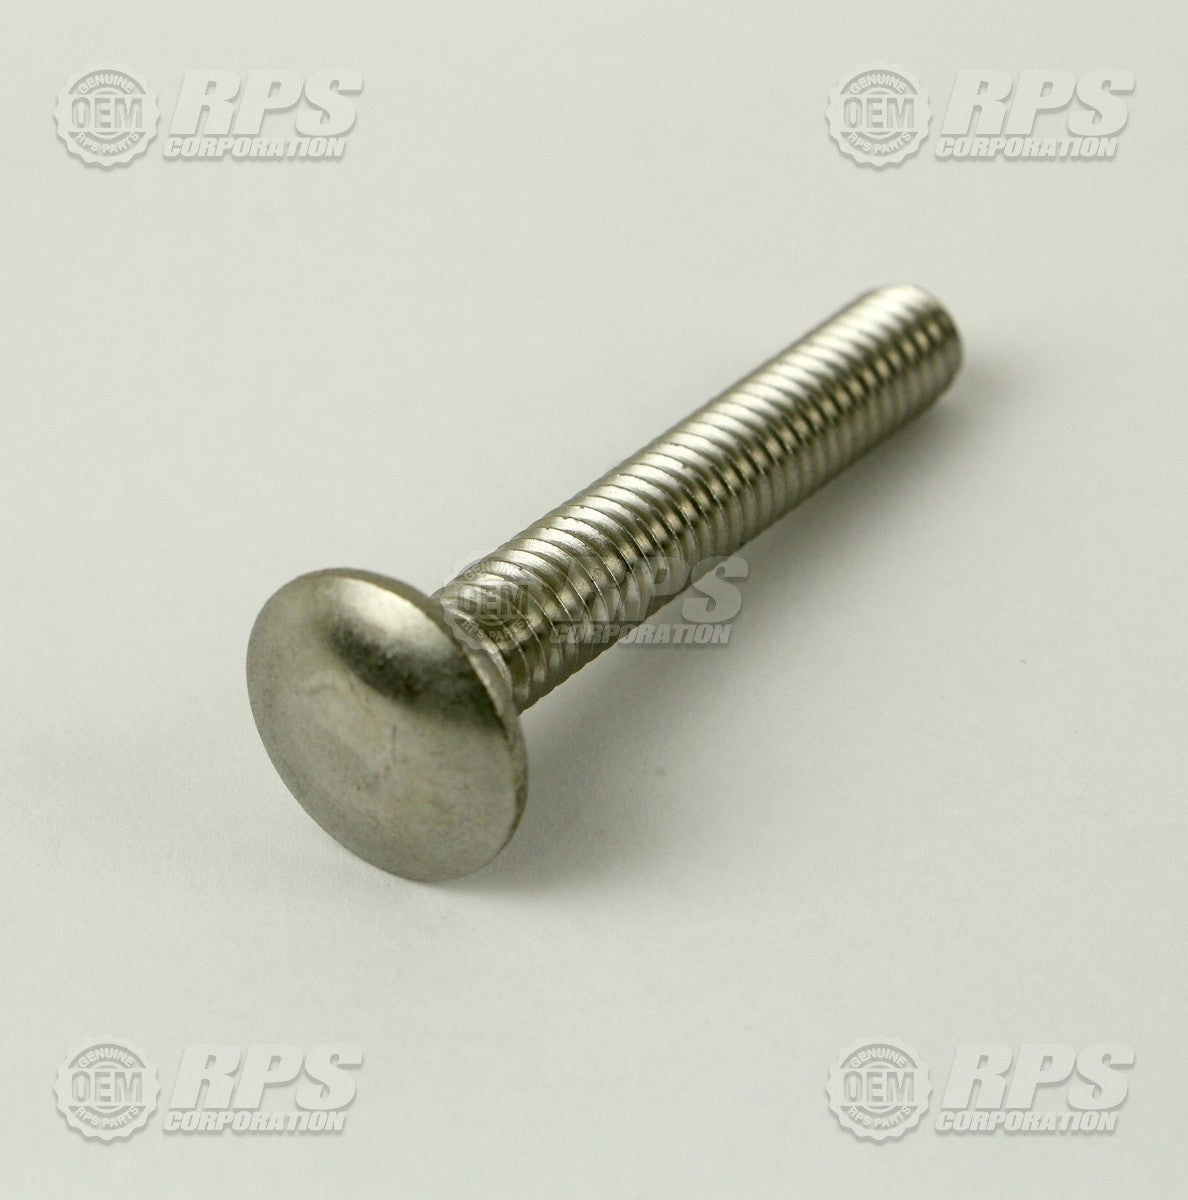 FactoryCat/Tomcat H-74433, Bolt,Carriage,5/16-18x2" Stainless